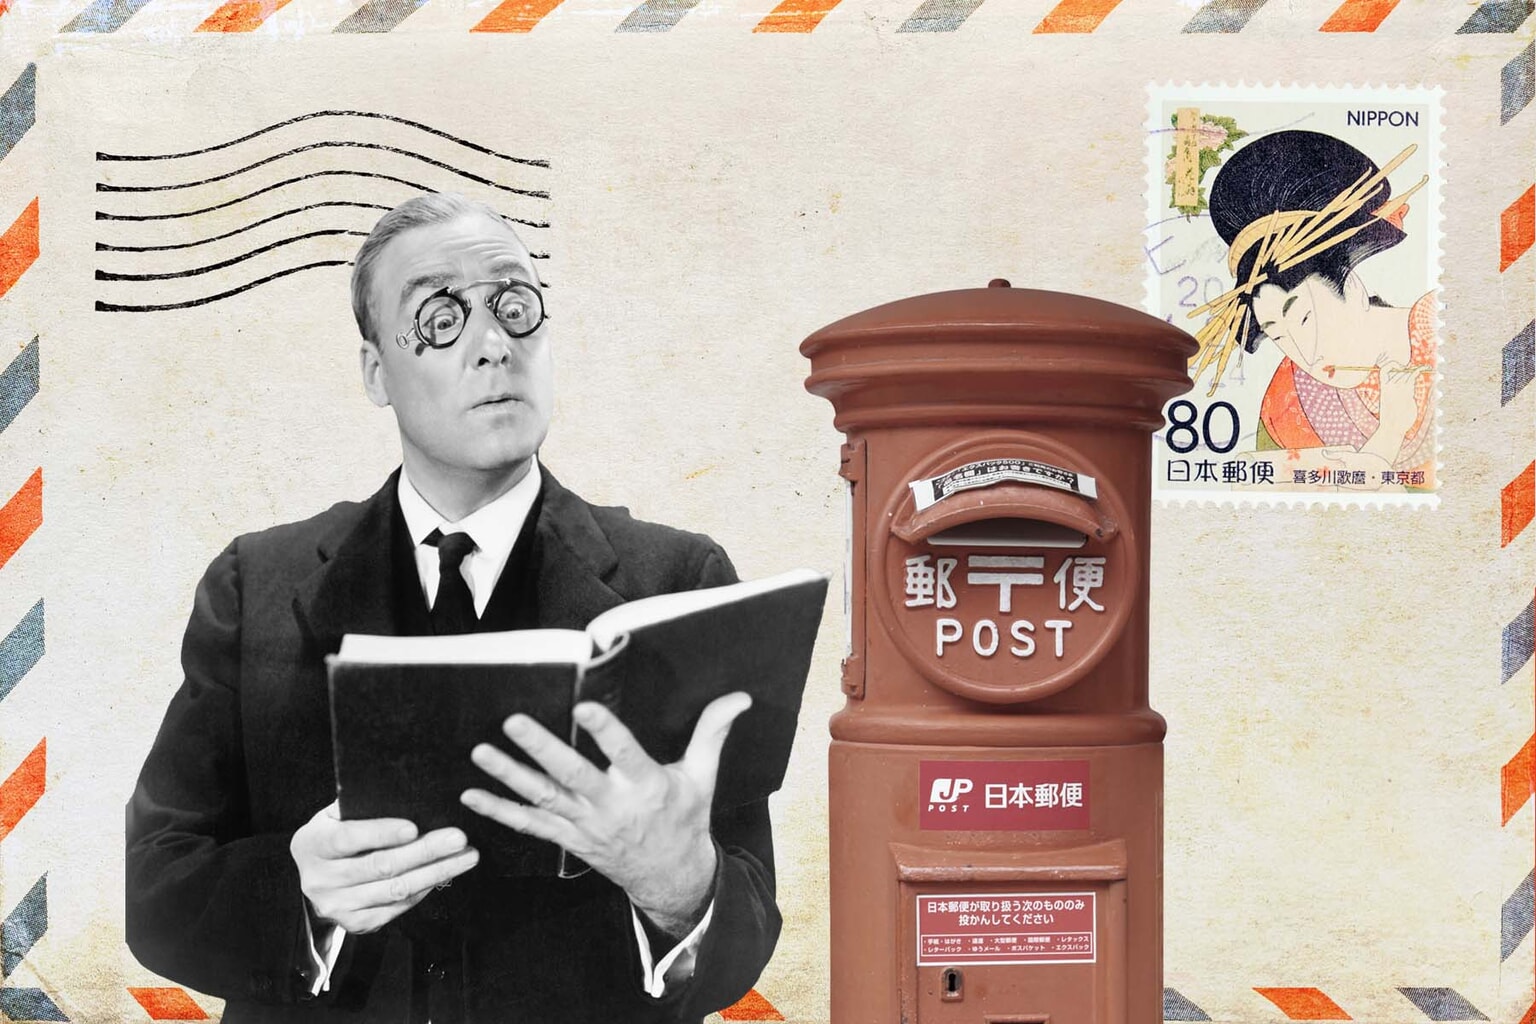 Japanese 102: How To Send Parcels at the Post Office